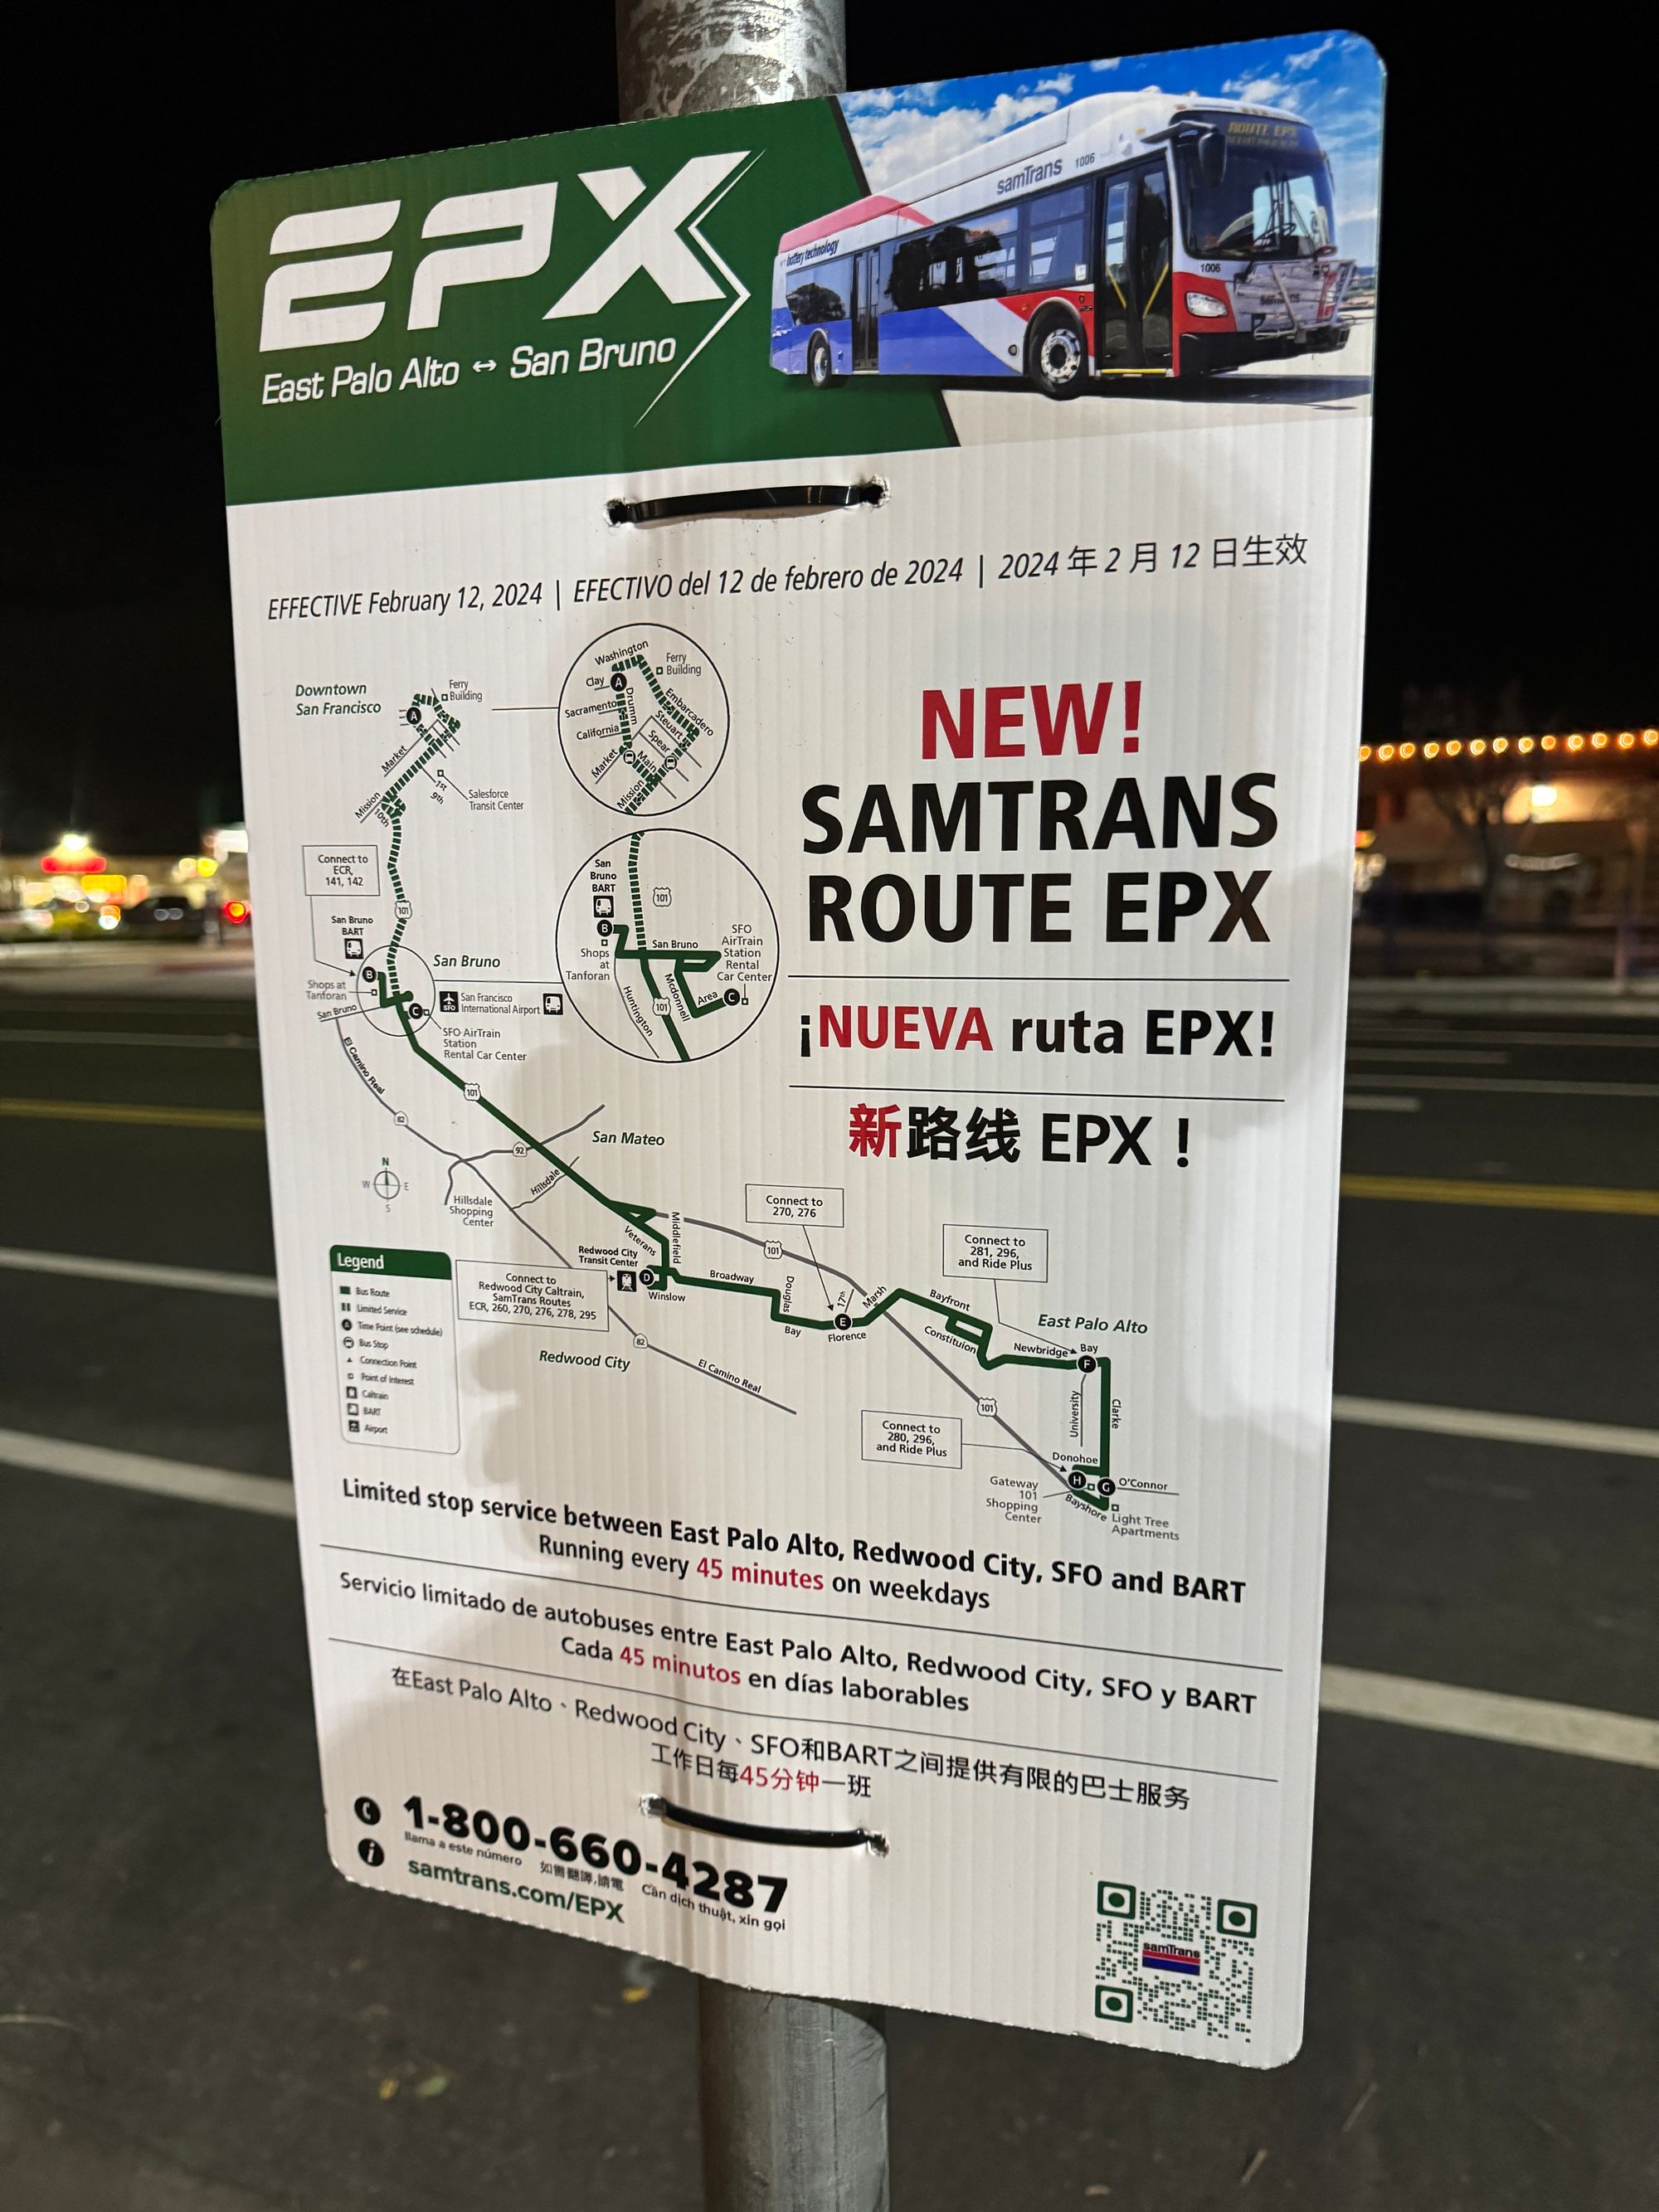 My First Ride on SamTrans EPX Bus From East Palo Alto to SFO Airport